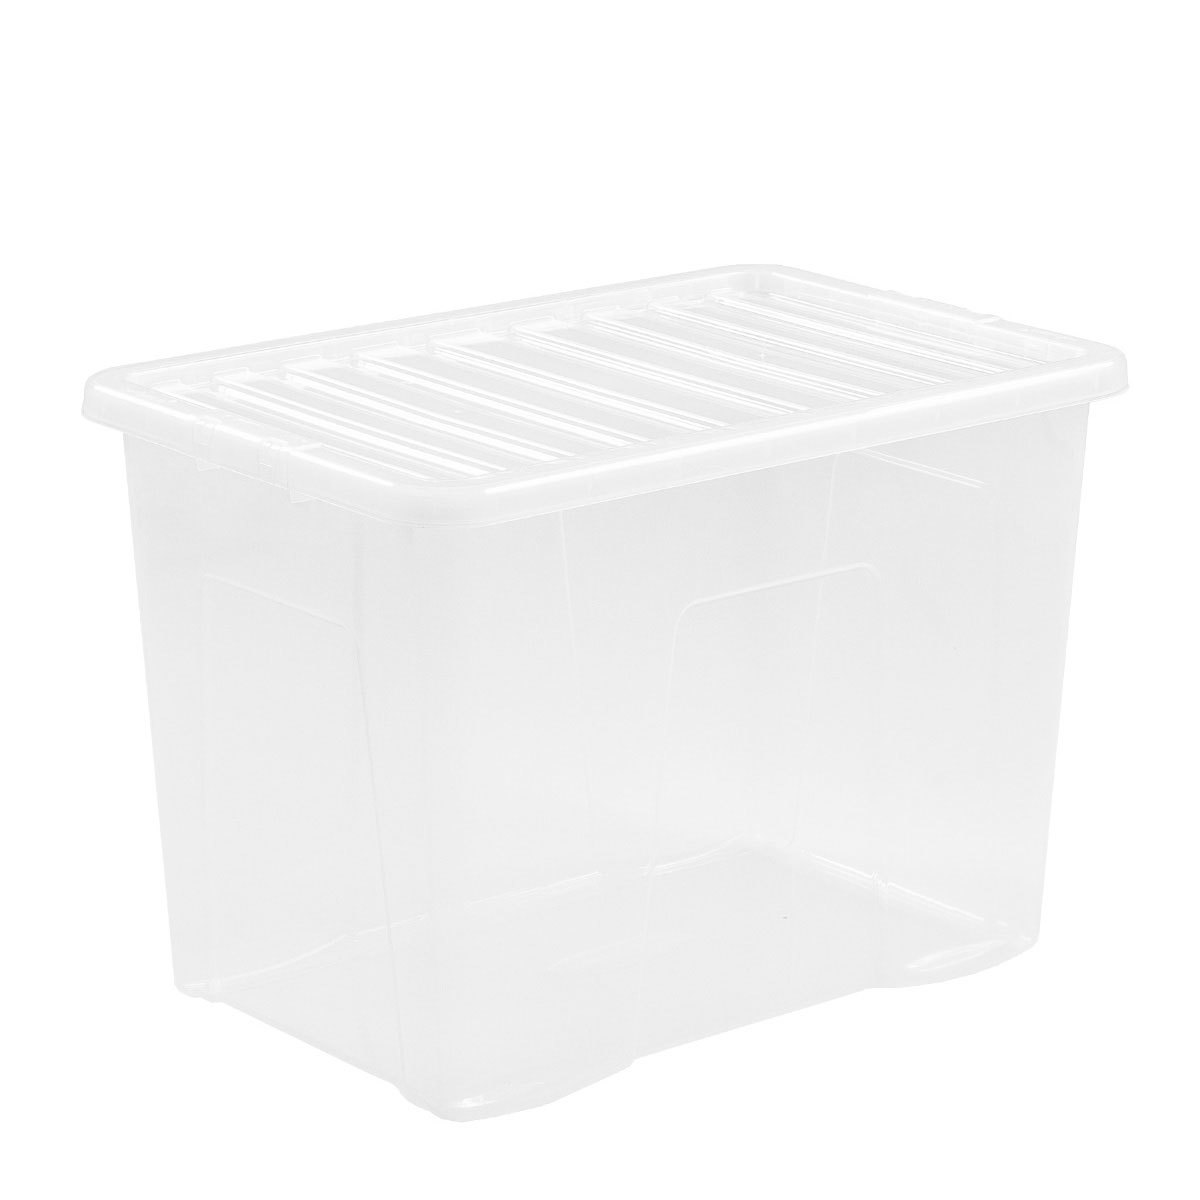 image of plastic box with closed lid